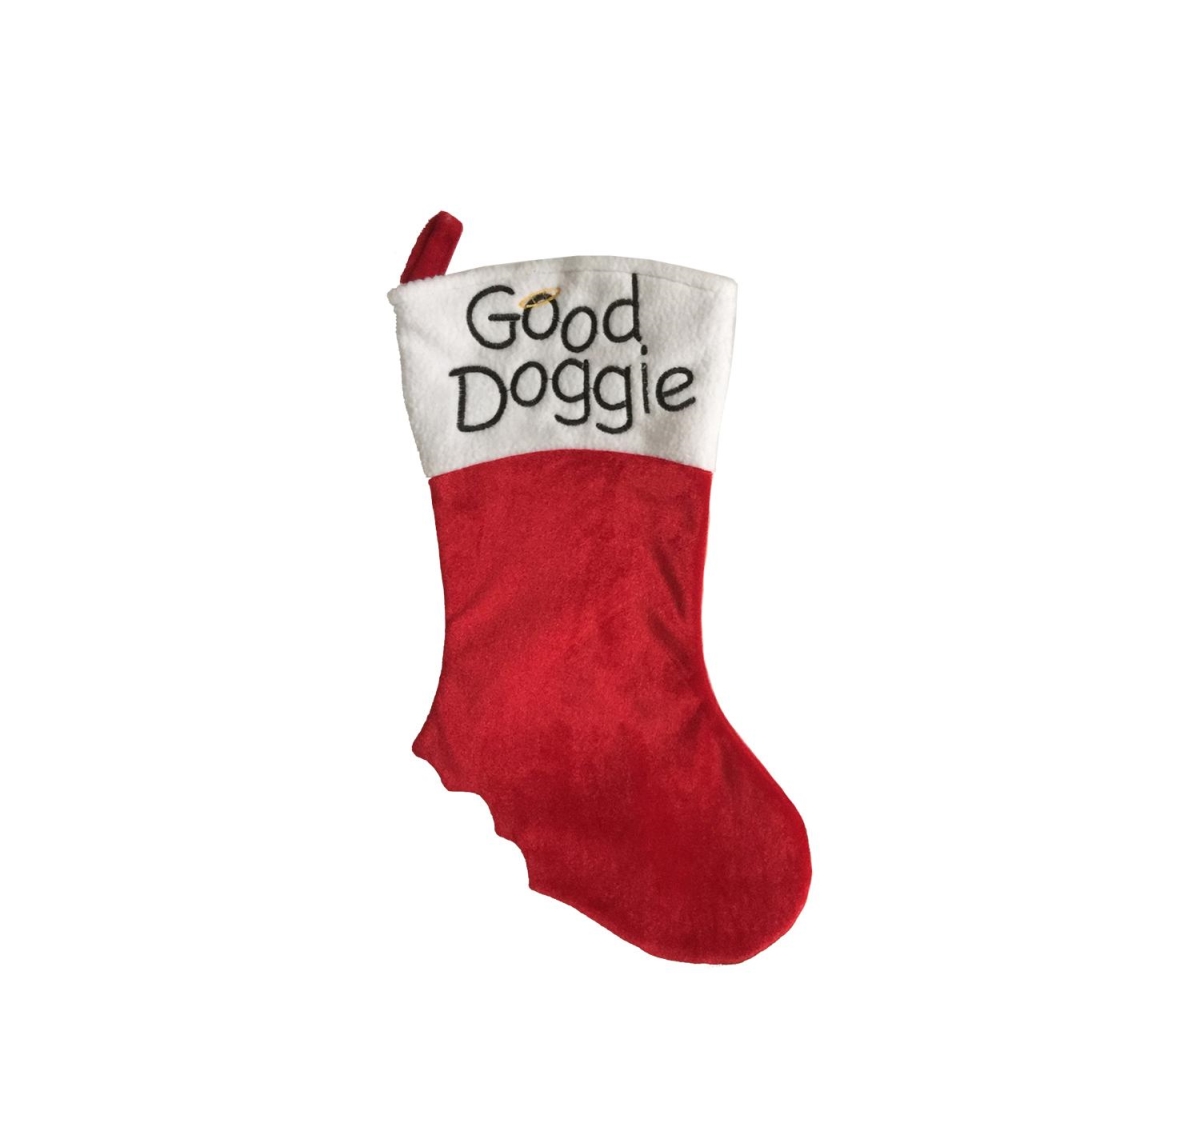 32283962 19 In. Red Embroidered Angel Pet Good Doggie Christmas Stocking With White Cuff